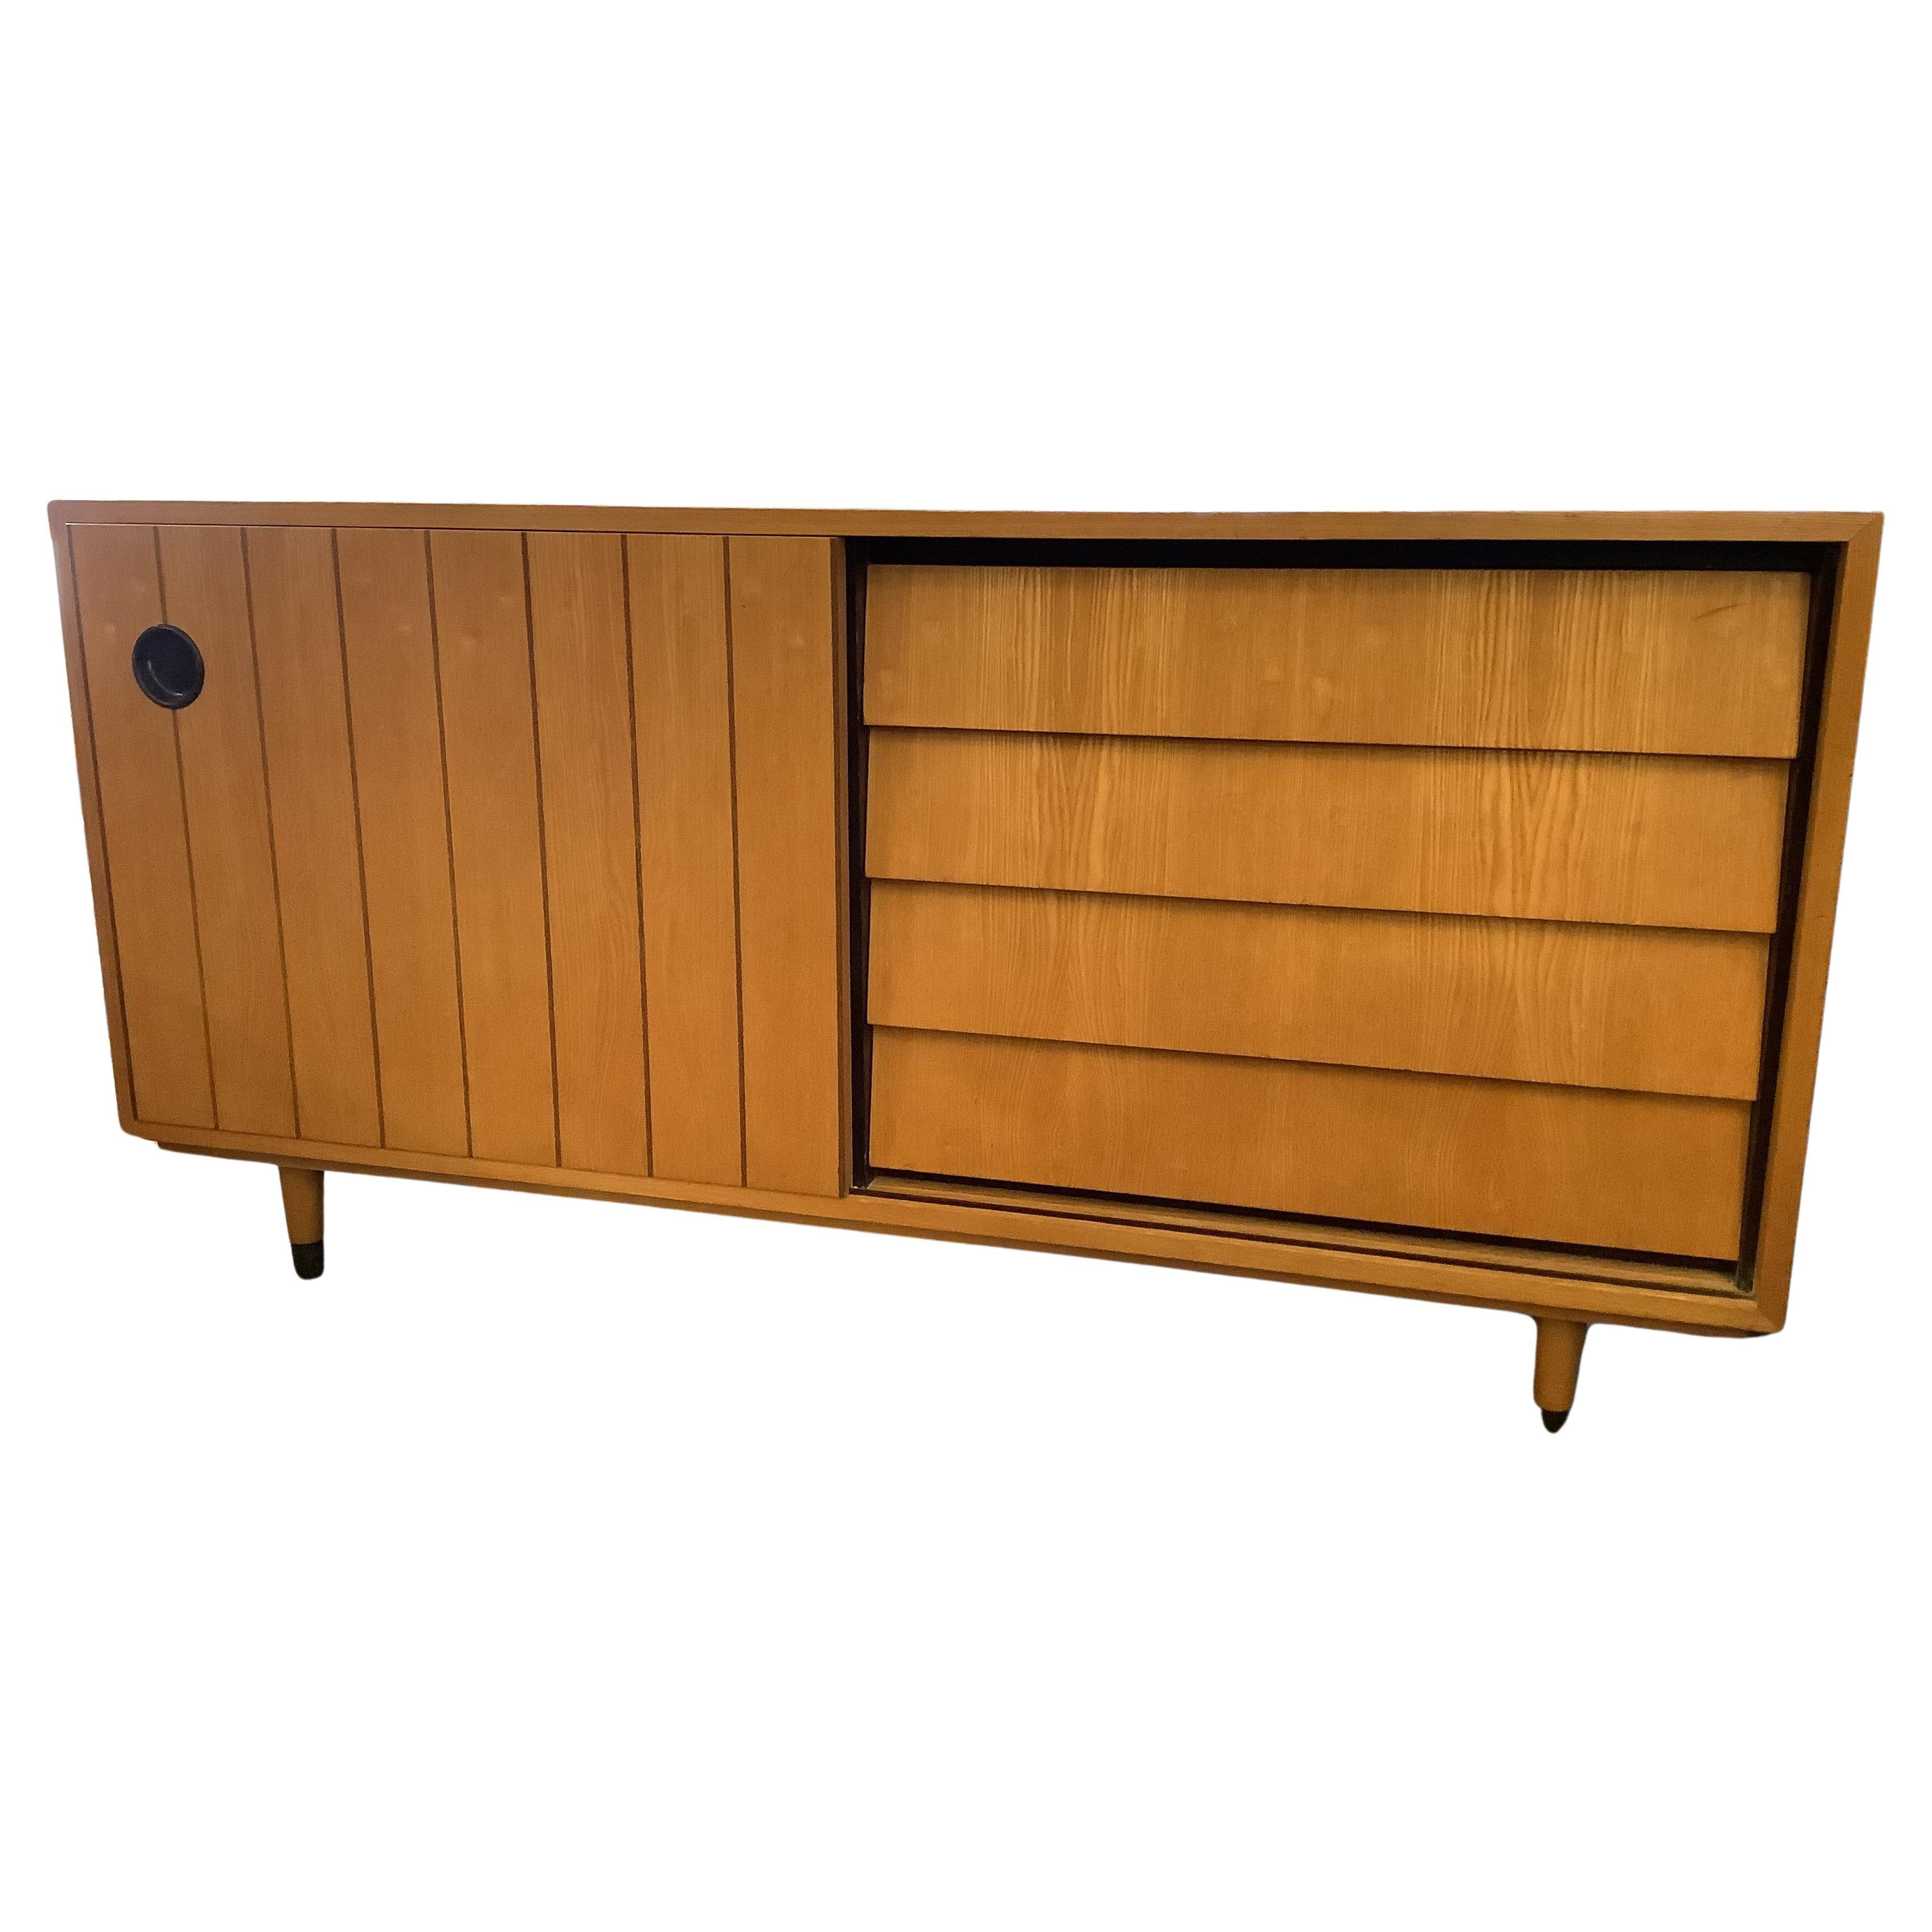 1950s sideboard by designed by Erich Stratmann For Sale